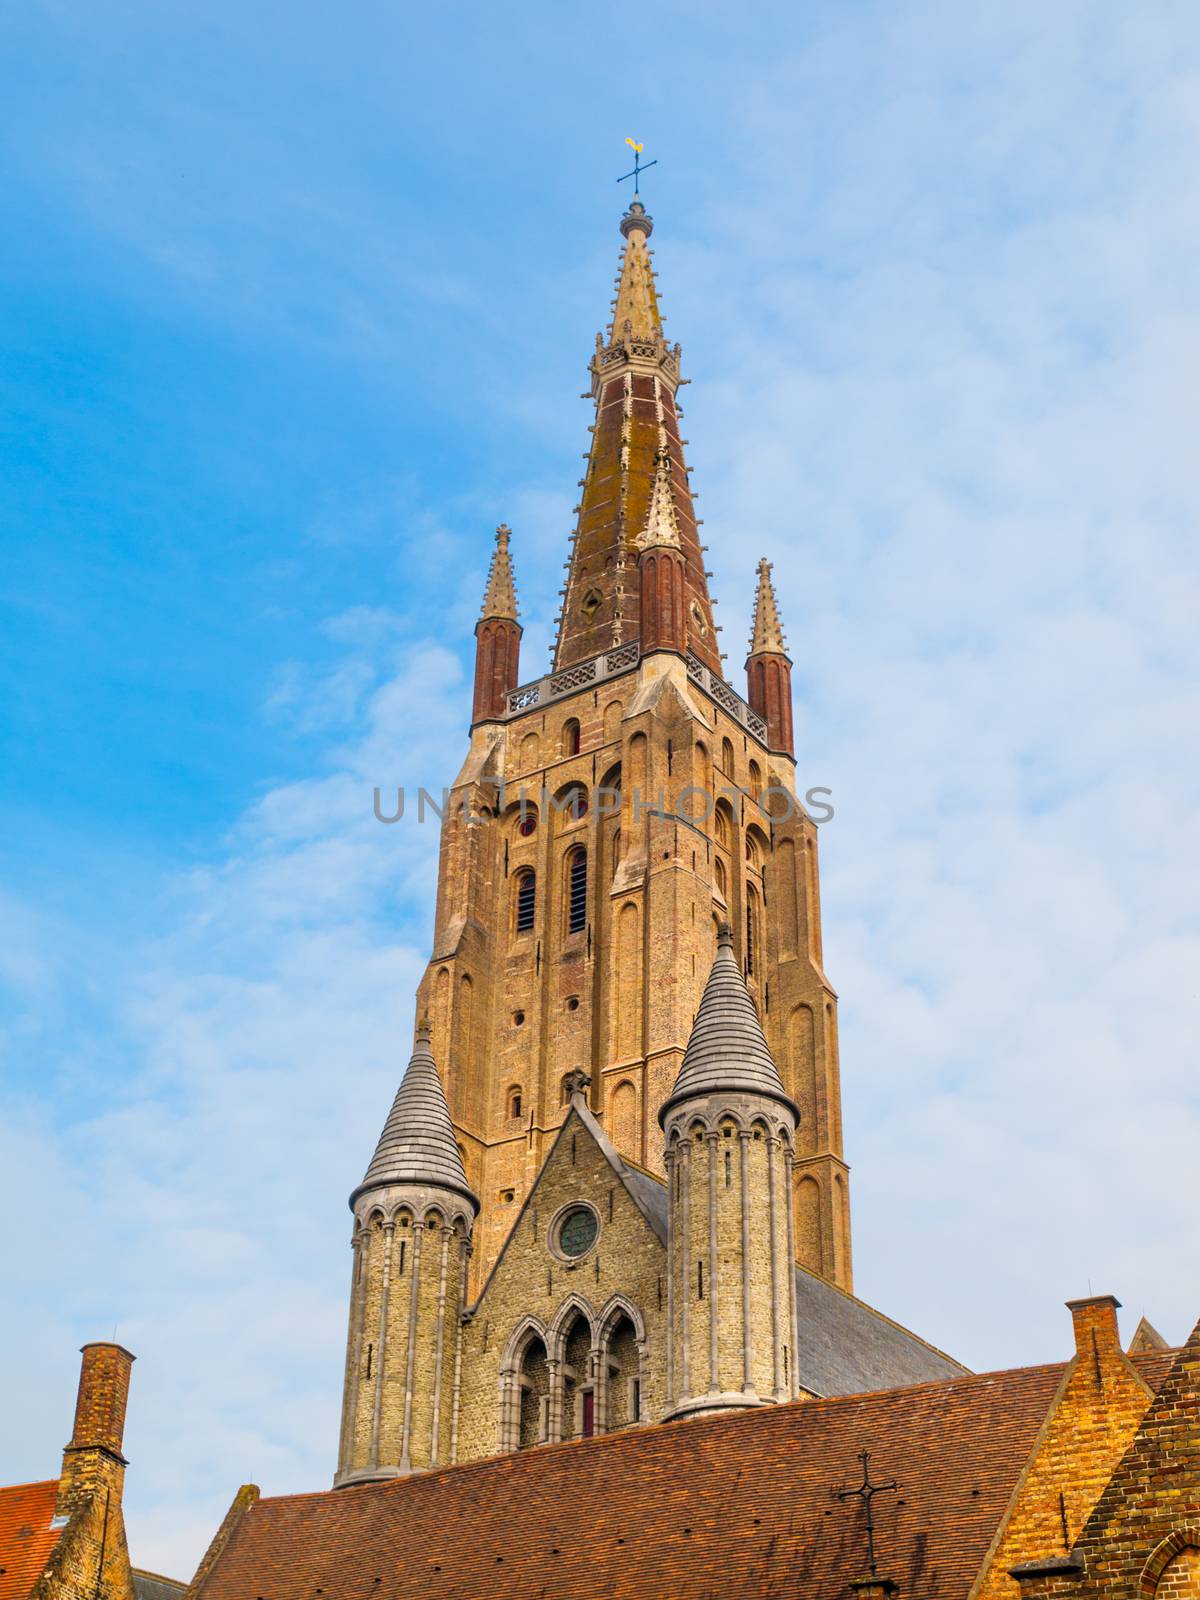 Church of Our Lady tower in Bruges by pyty